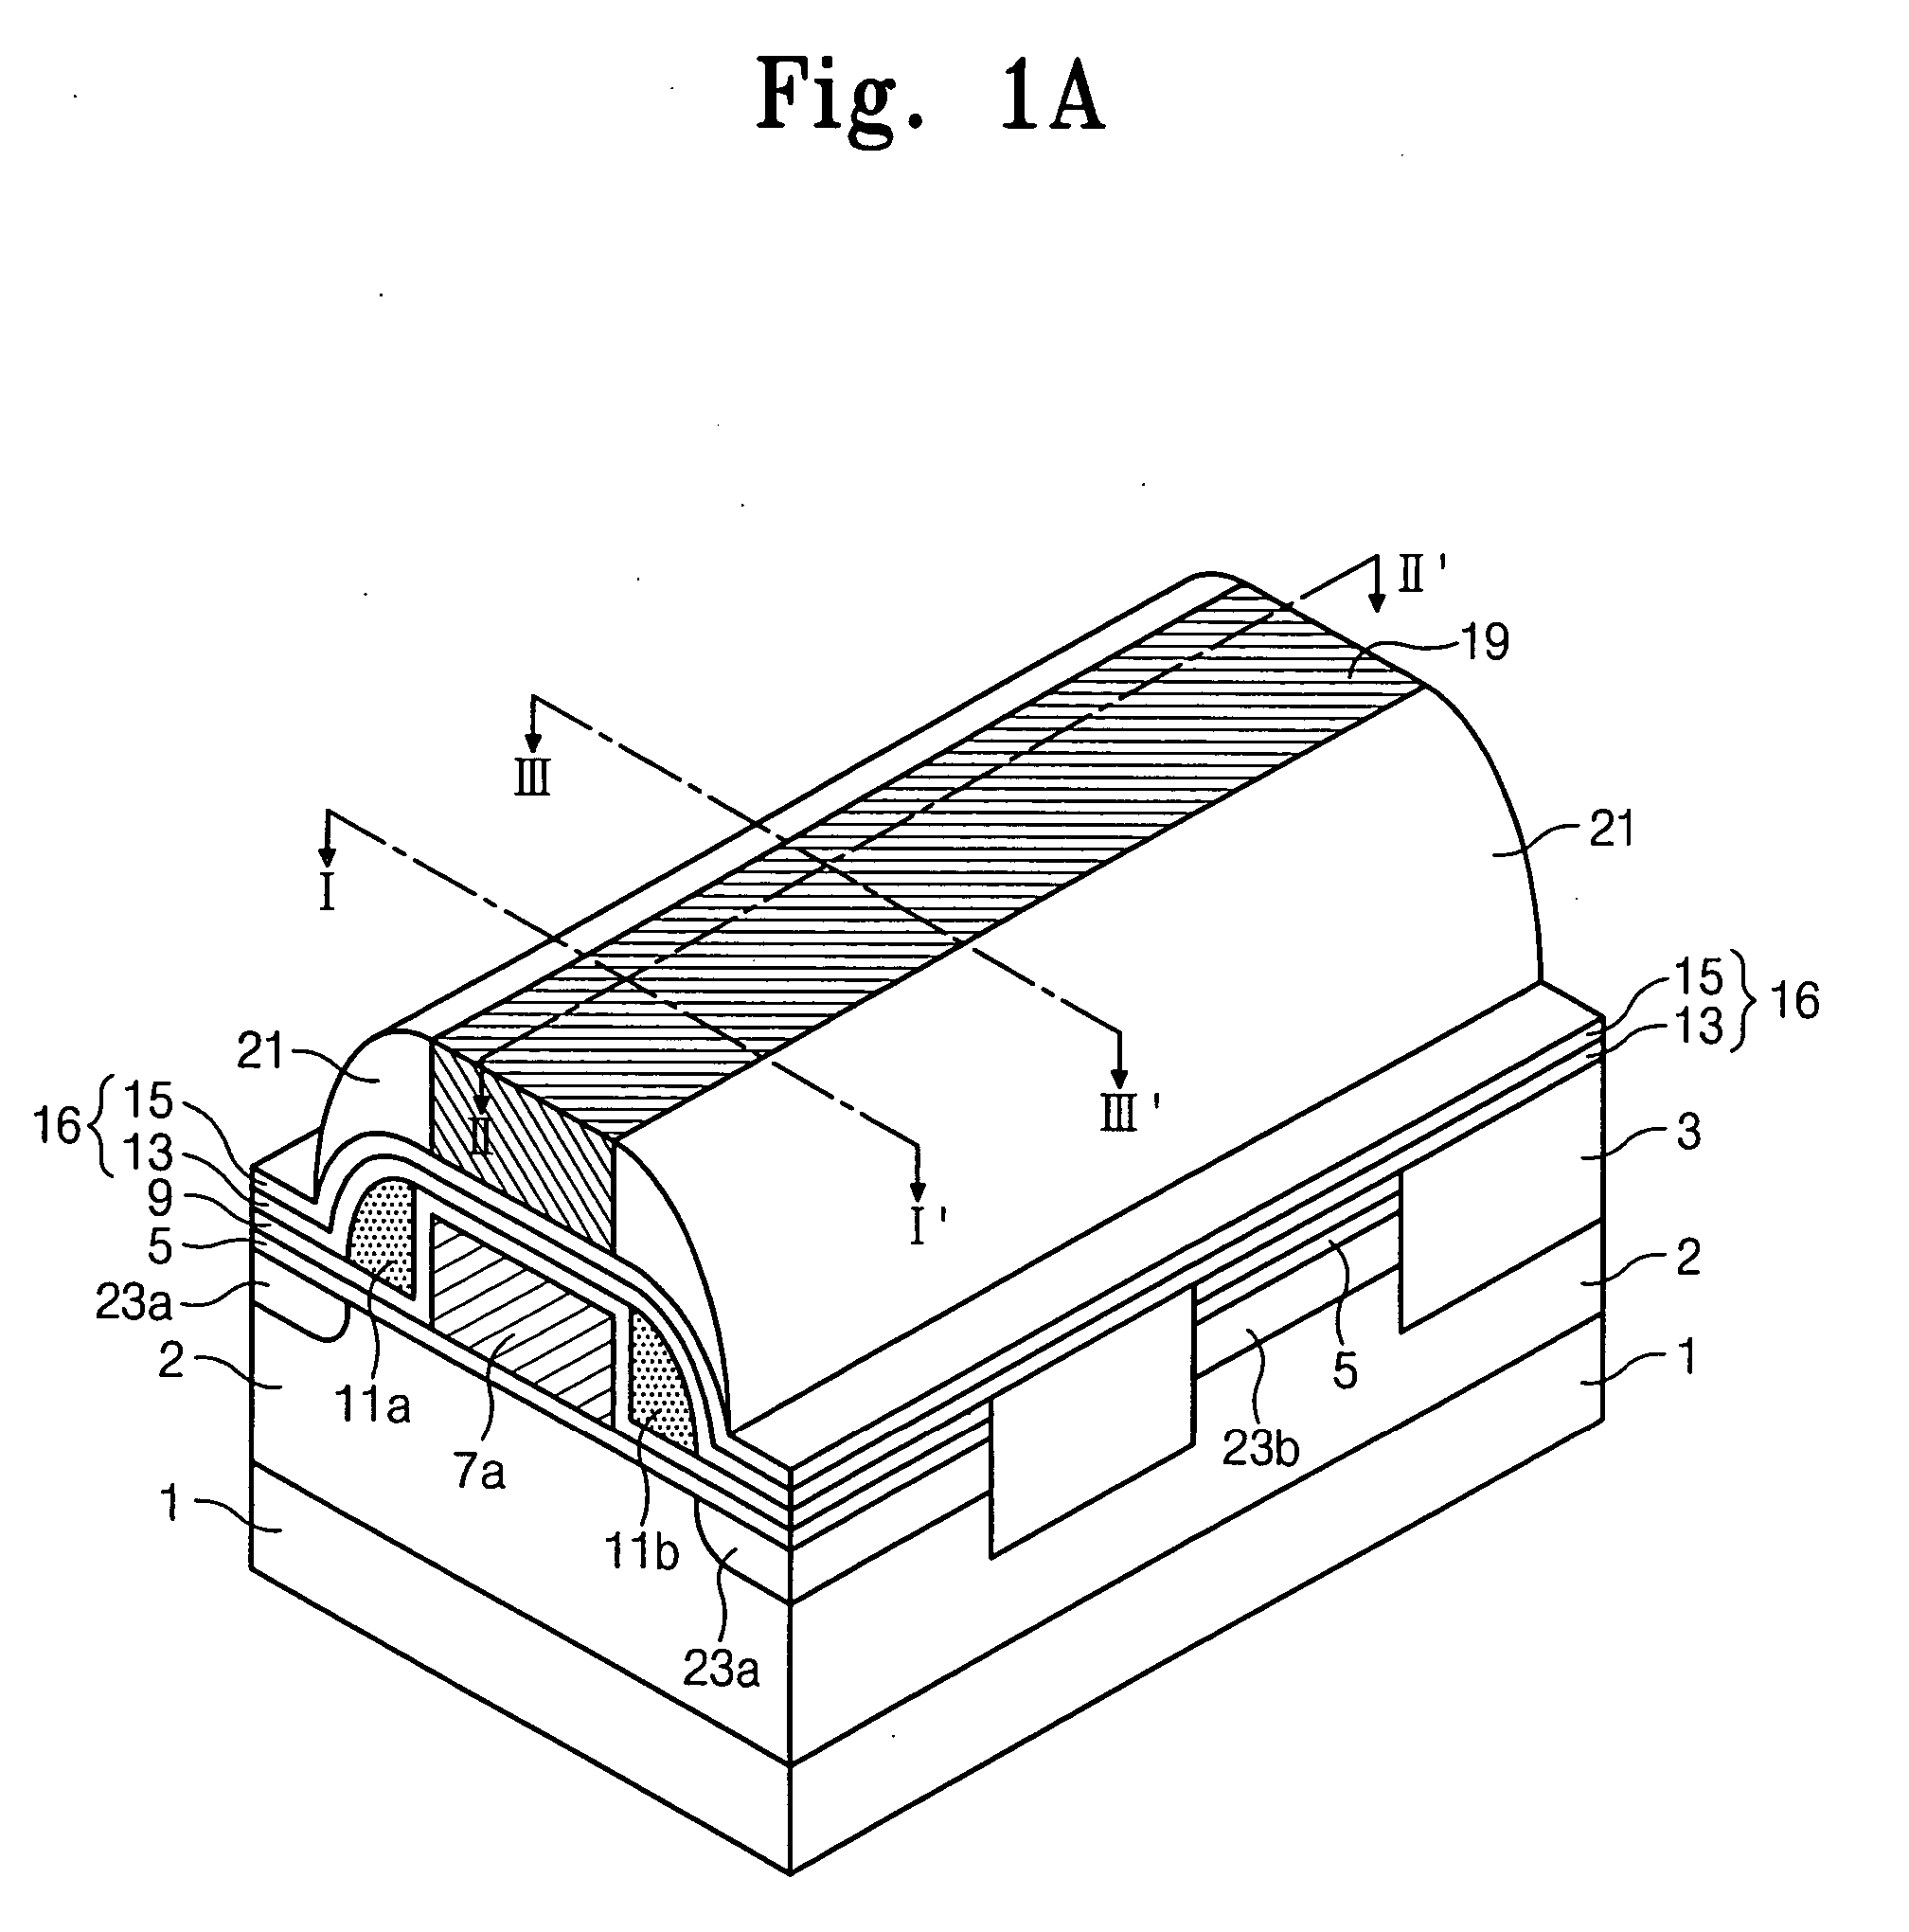 Non-volatile memory device and methods of forming and operating the same